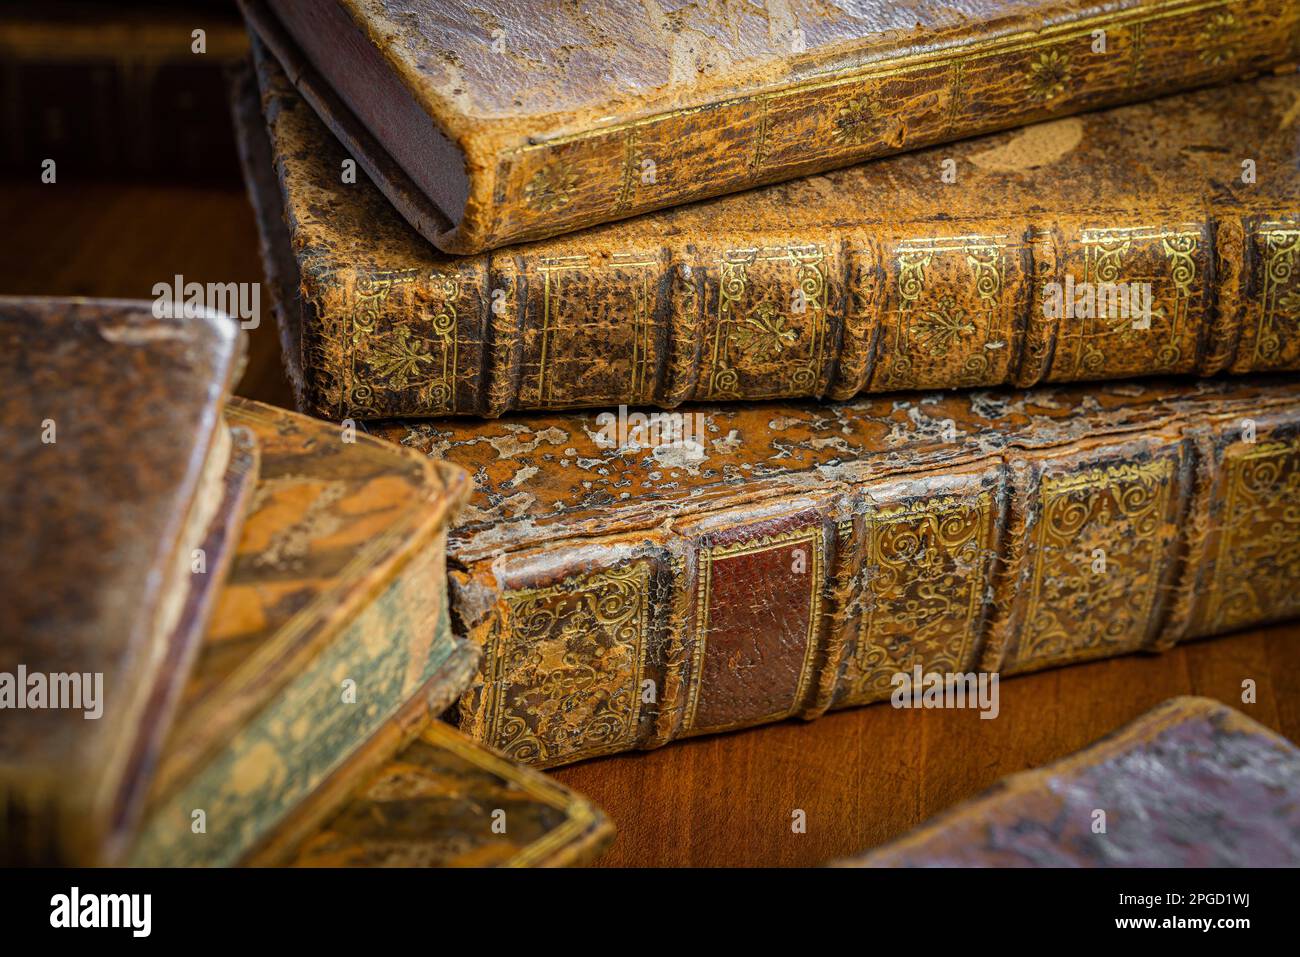 Pile of antique books with a leather cover and golden ornaments on a wooden table Stock Photo